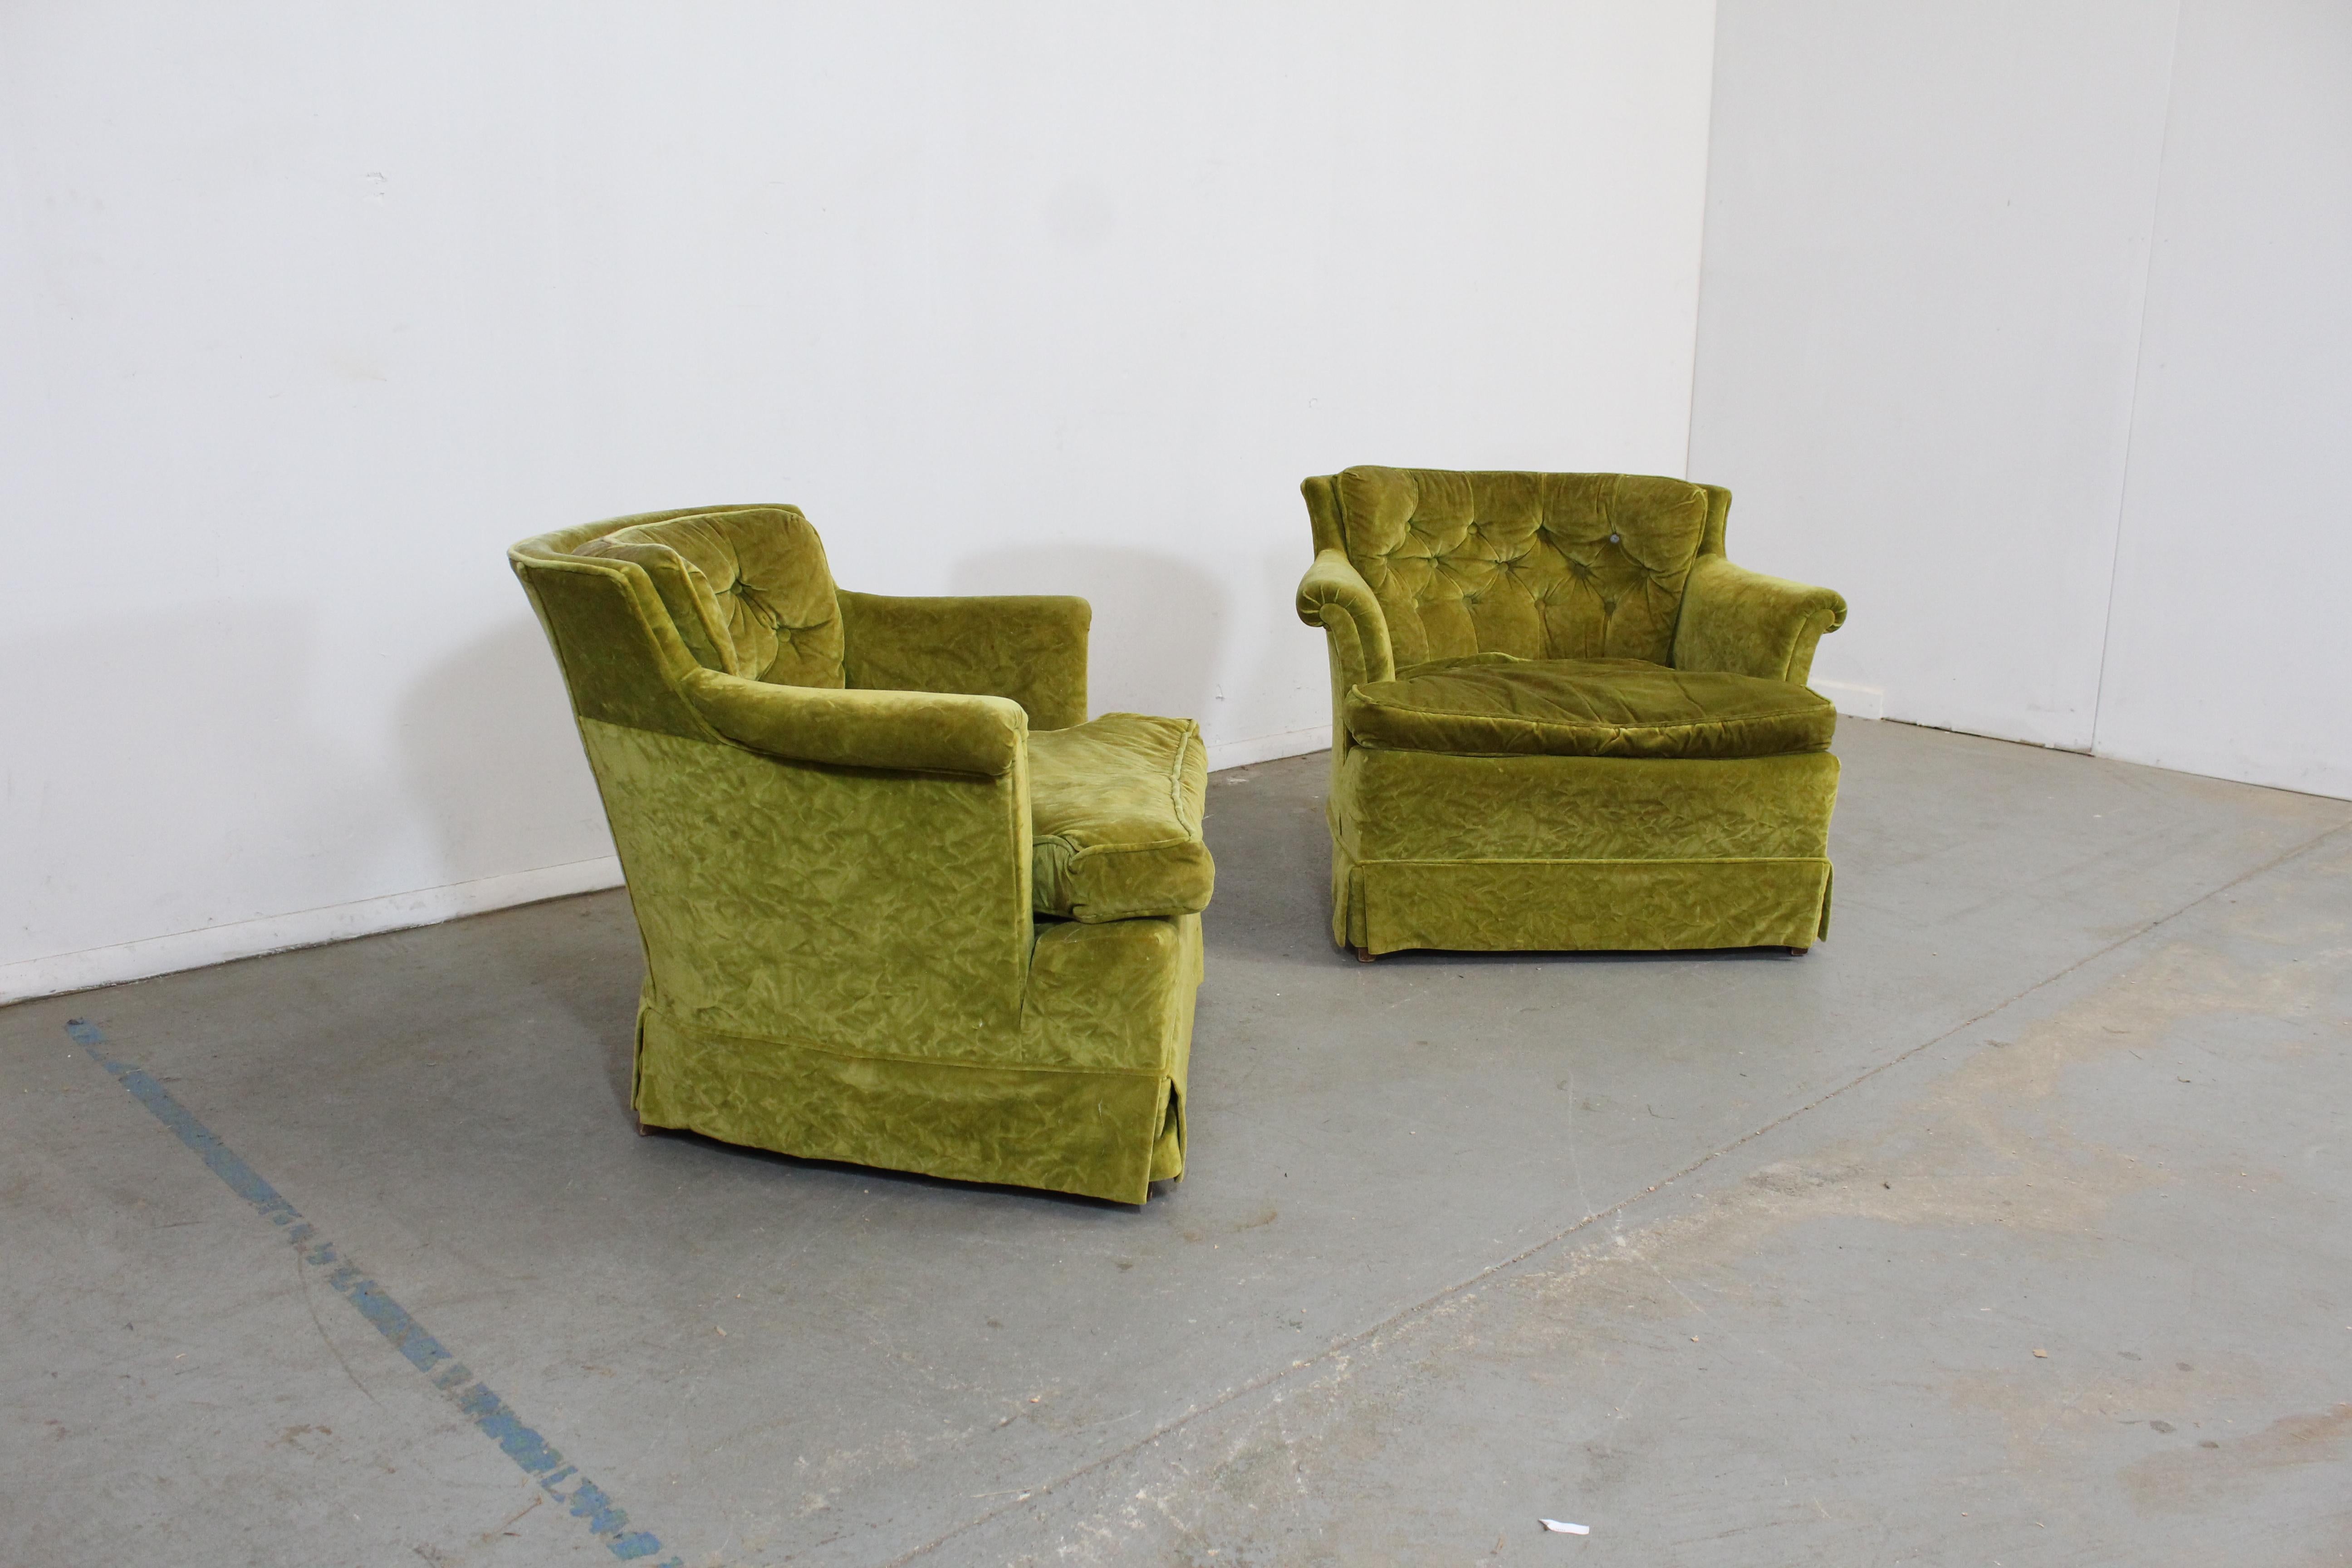 Pair of Mid-Century Modern tufted club chairs

Offered is a pair of club chairs. They are unsigned. These two chairs could stand to be reupholstered due to staining and age wear on the fabric. The chairs are structurally sound. See our other